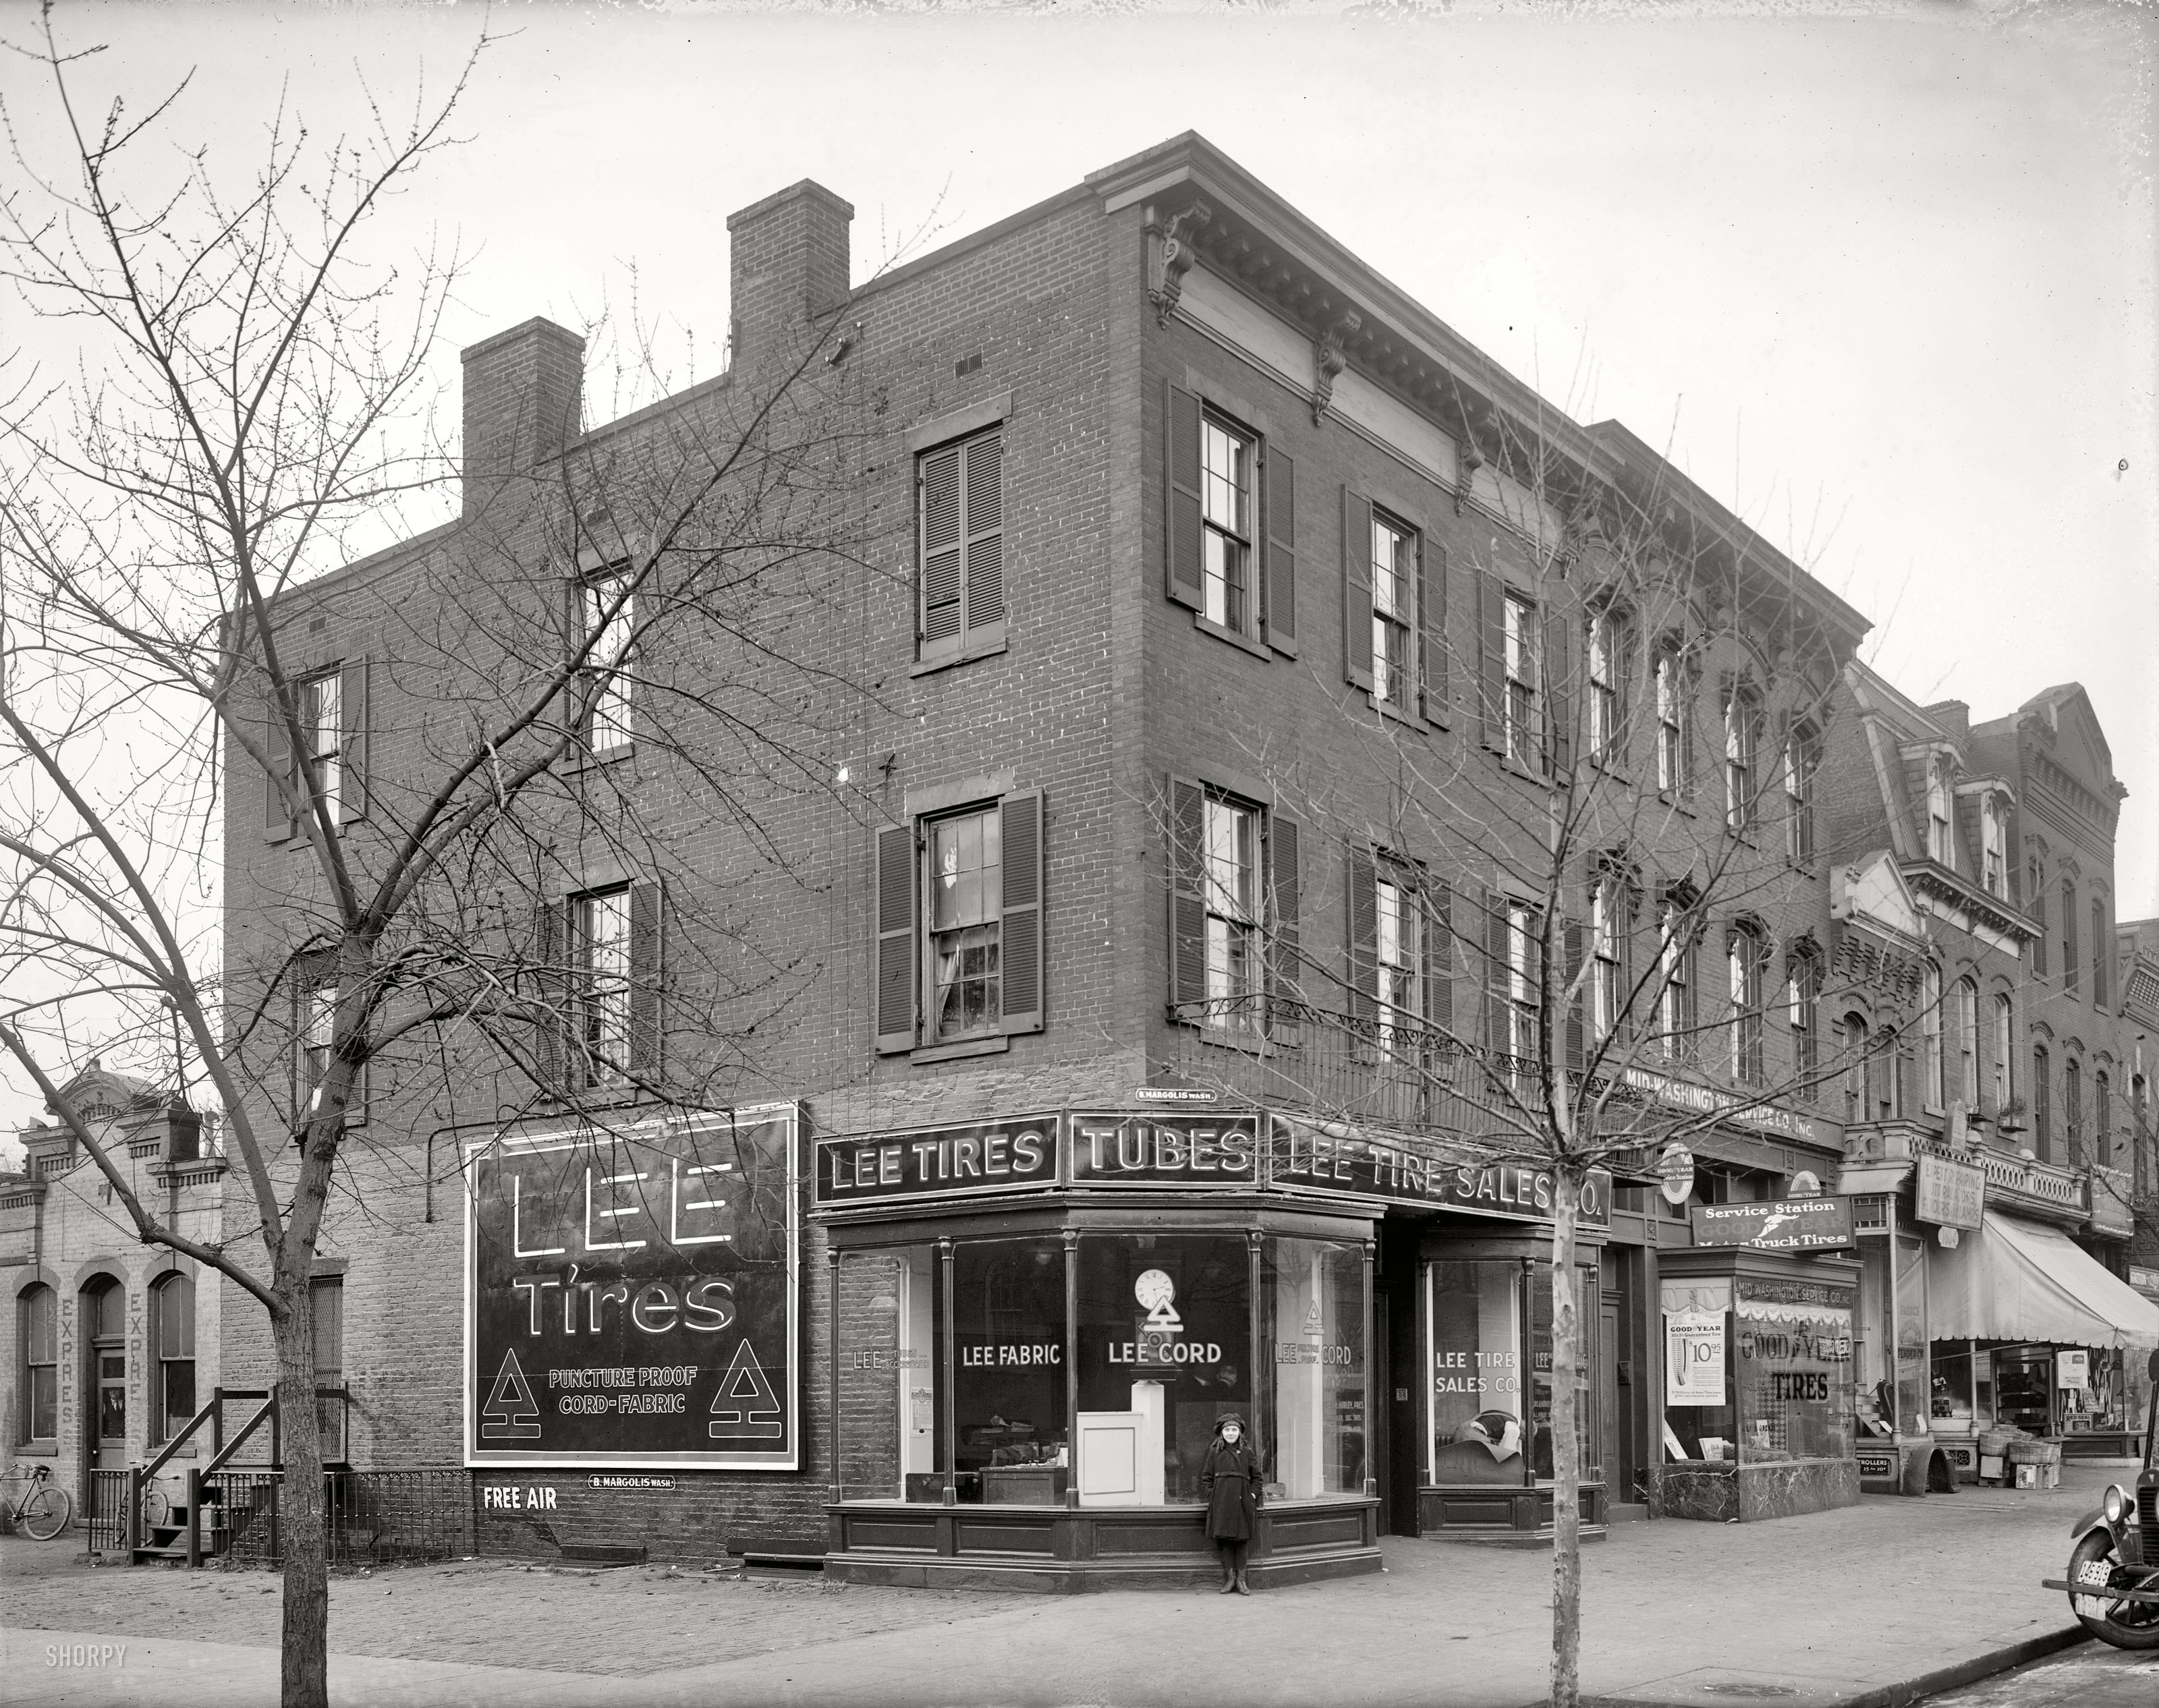 Washington, D.C., circa 1921. "Lee Tire Sales Co., exterior." A clutch of transport-related businesses on 14th Street N.W. National Photo Company. View full size.